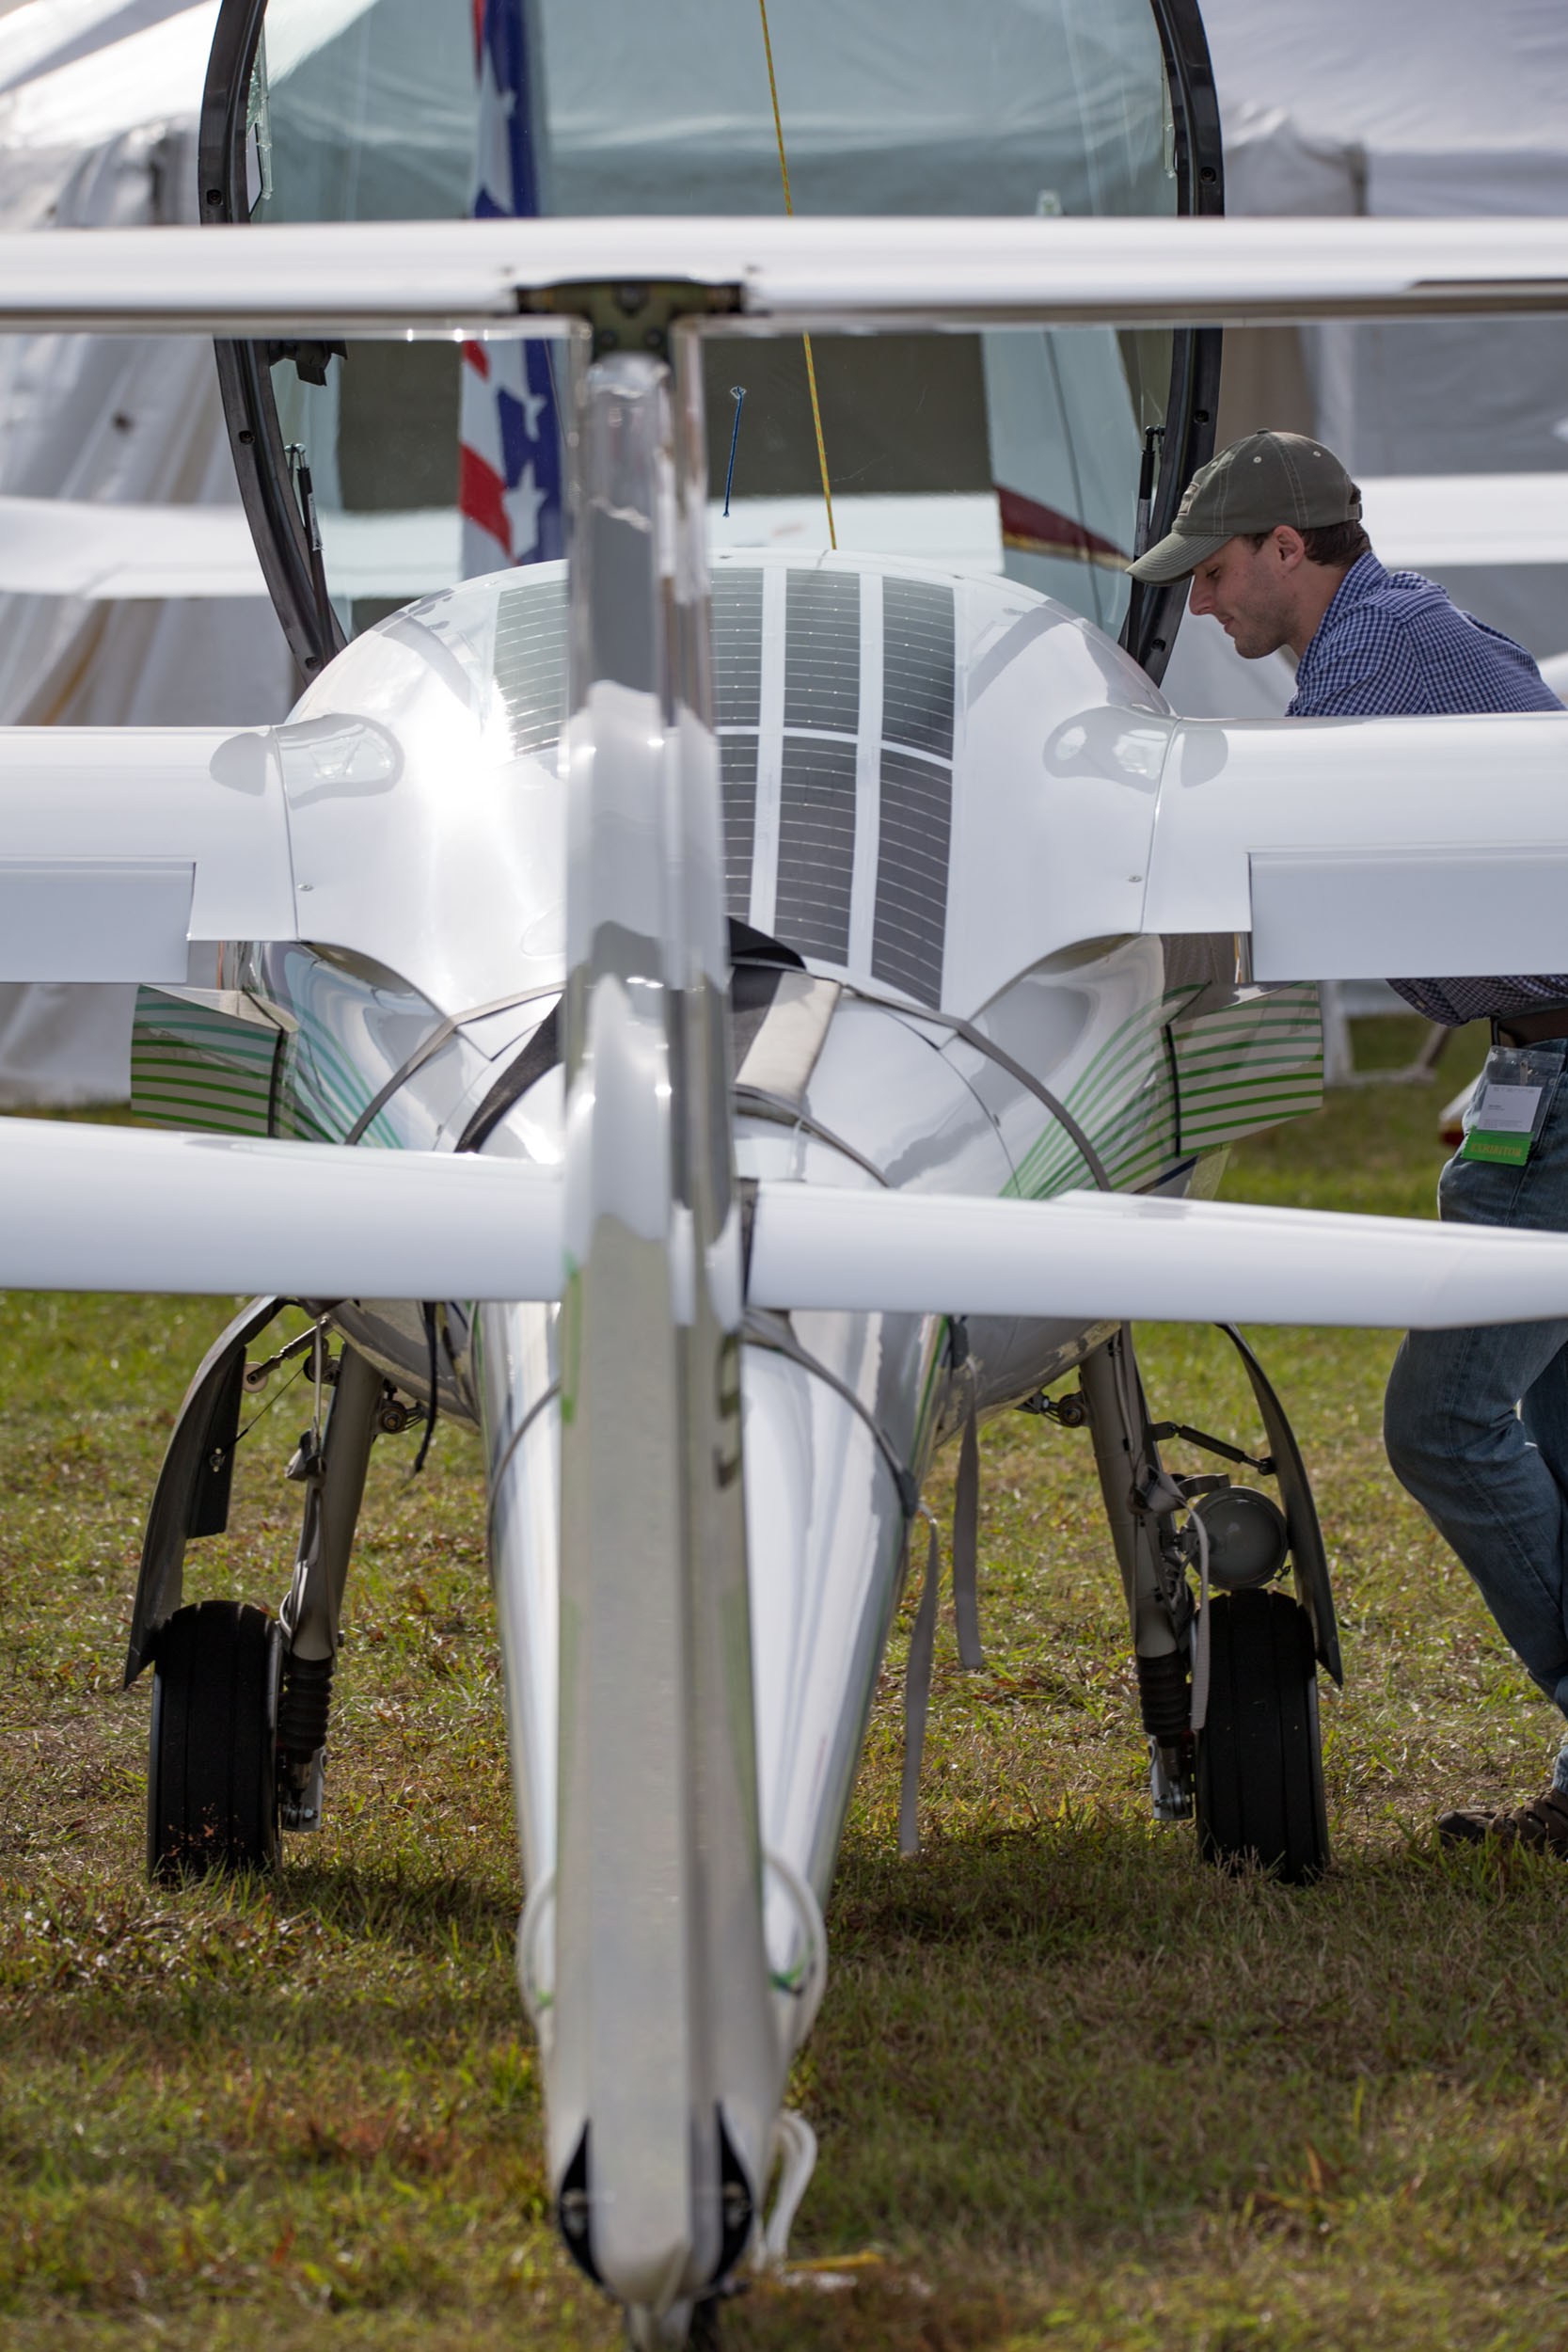 This airplane sports rows of solar cells behind its canopy. Photo courtesy U.S. Sport Aviation Expo.